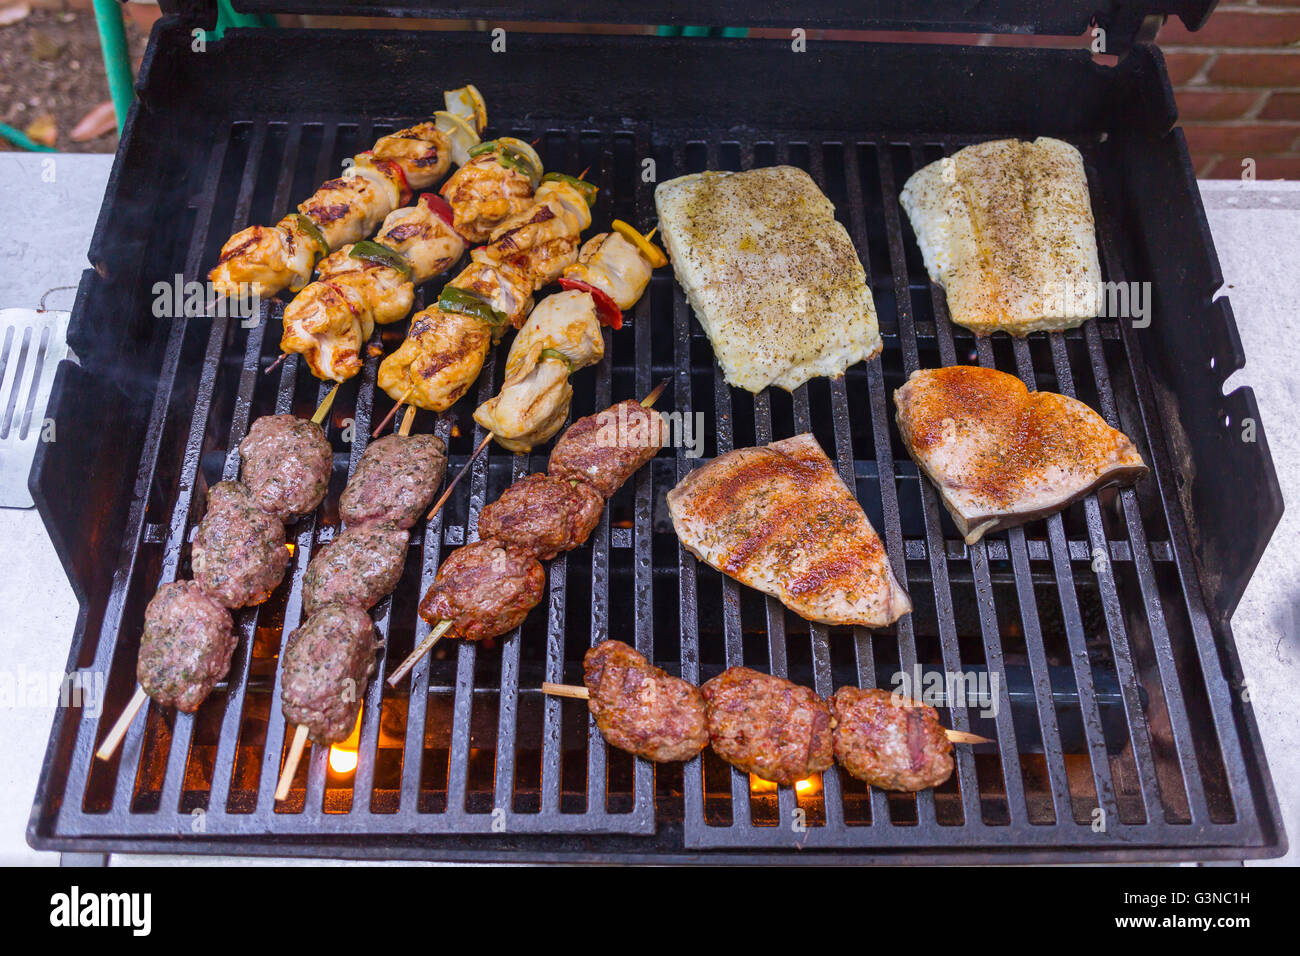 VIRGINIA, USA - Chicken kabobs, lamb kofta skewers, and fish grilling on barbecue. Stock Photo